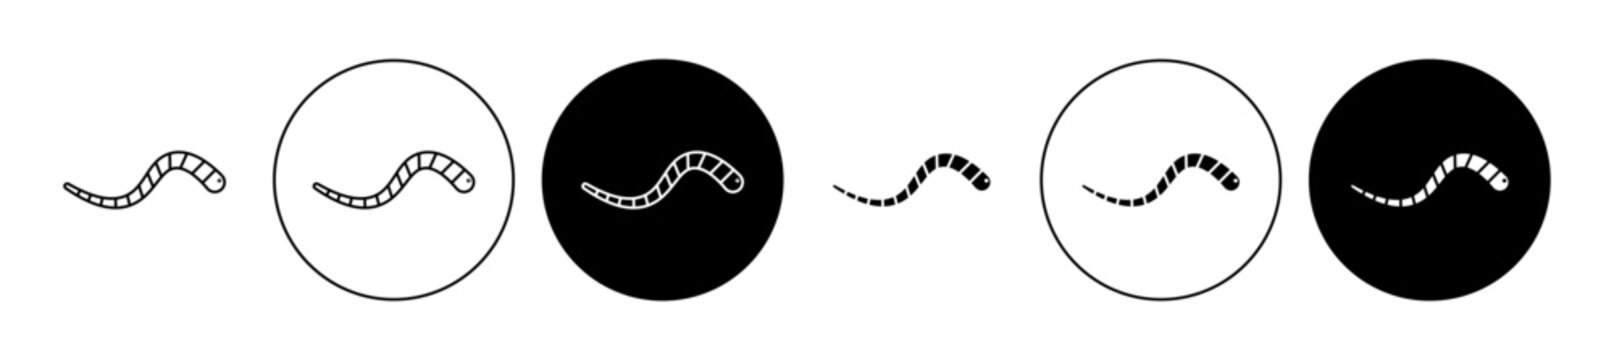 Earthworm Gummy Vector Illustration Set. Caterpillar and Larva Sign suitable for apps and websites UI design style.